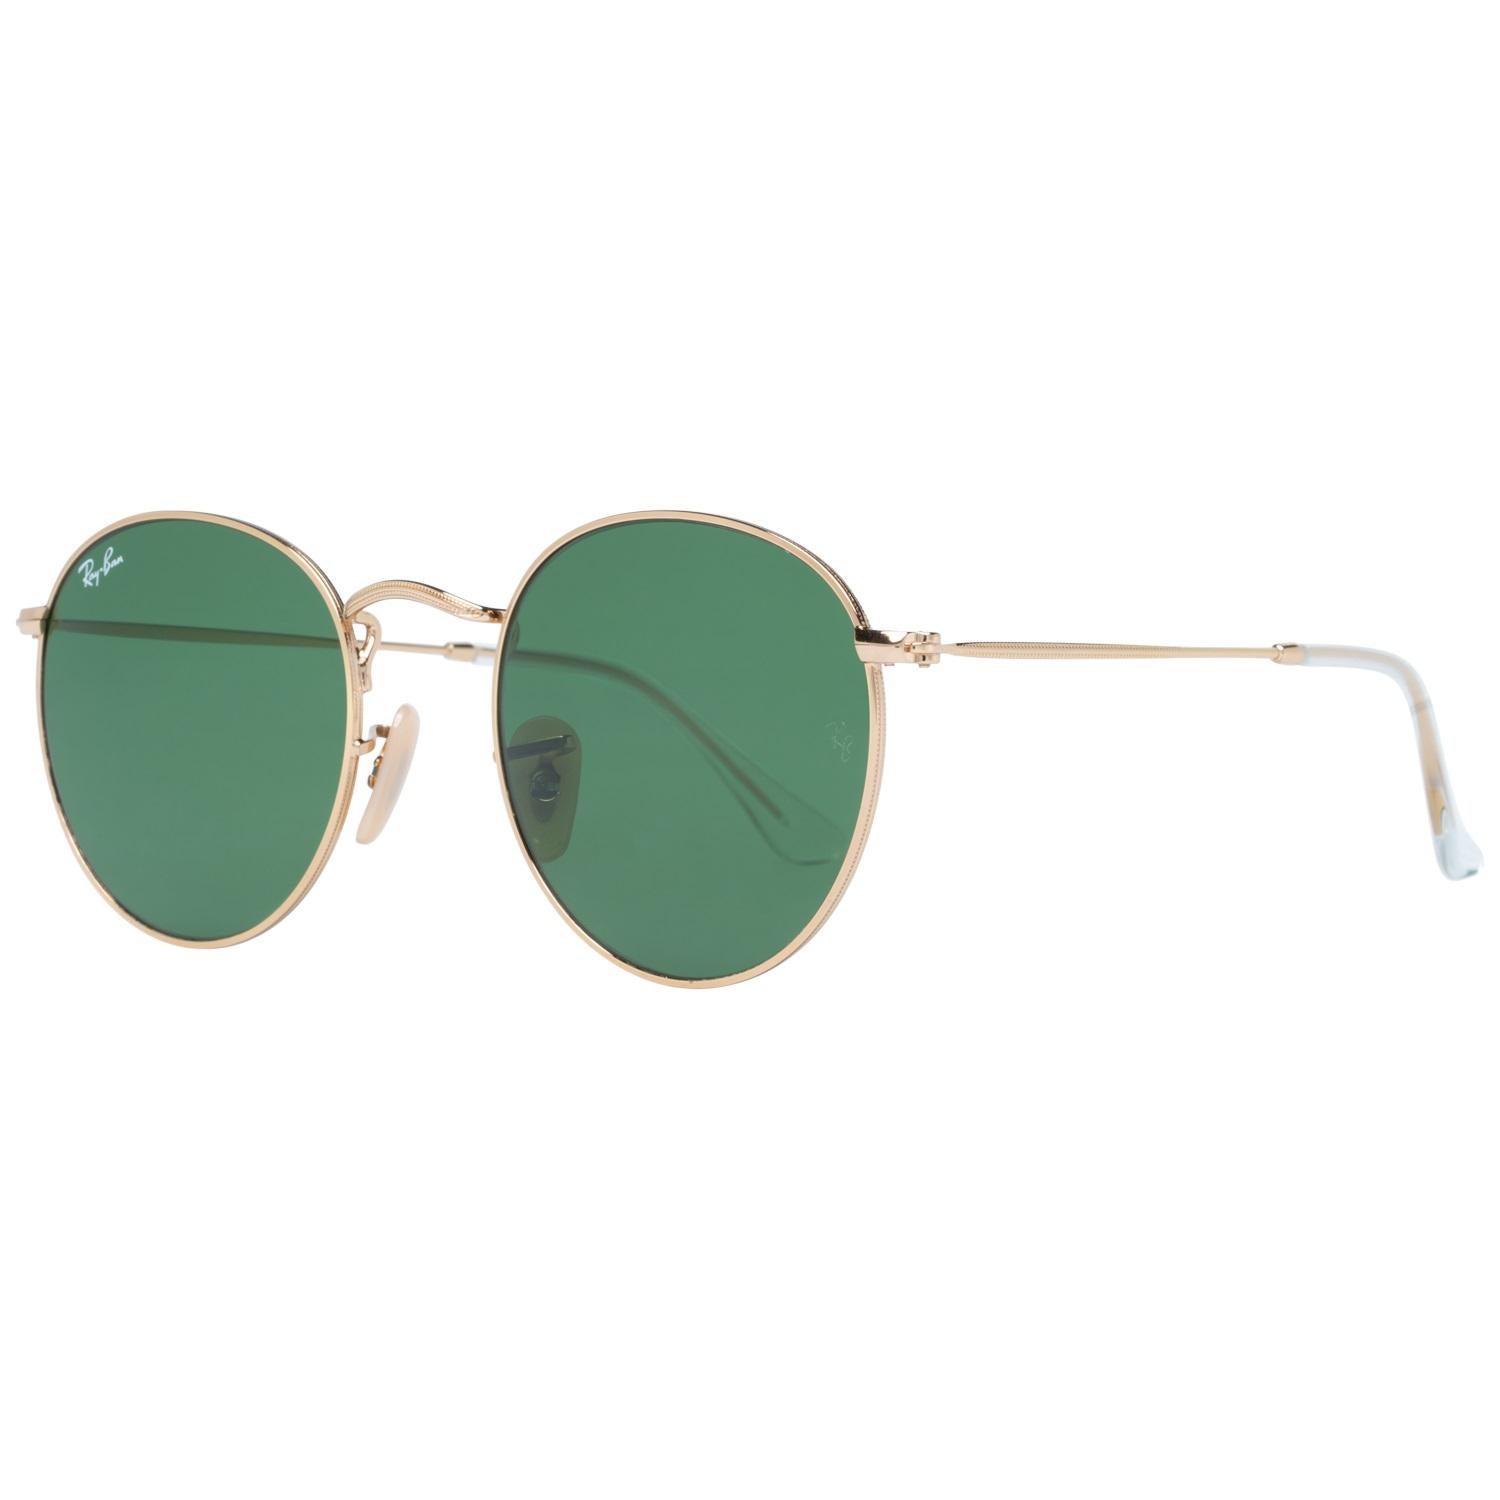 Details

MATERIAL: Metal

COLOR: Gold

MODEL: RB3447 001 50

GENDER: Adult Unisex

COUNTRY OF MANUFACTURE: Italy

TYPE: Sunglasses

ORIGINAL CASE?: Yes

STYLE: Oval

OCCASION: Casual

FEATURES: Lightweight

LENS COLOR: Green

LENS TECHNOLOGY: No